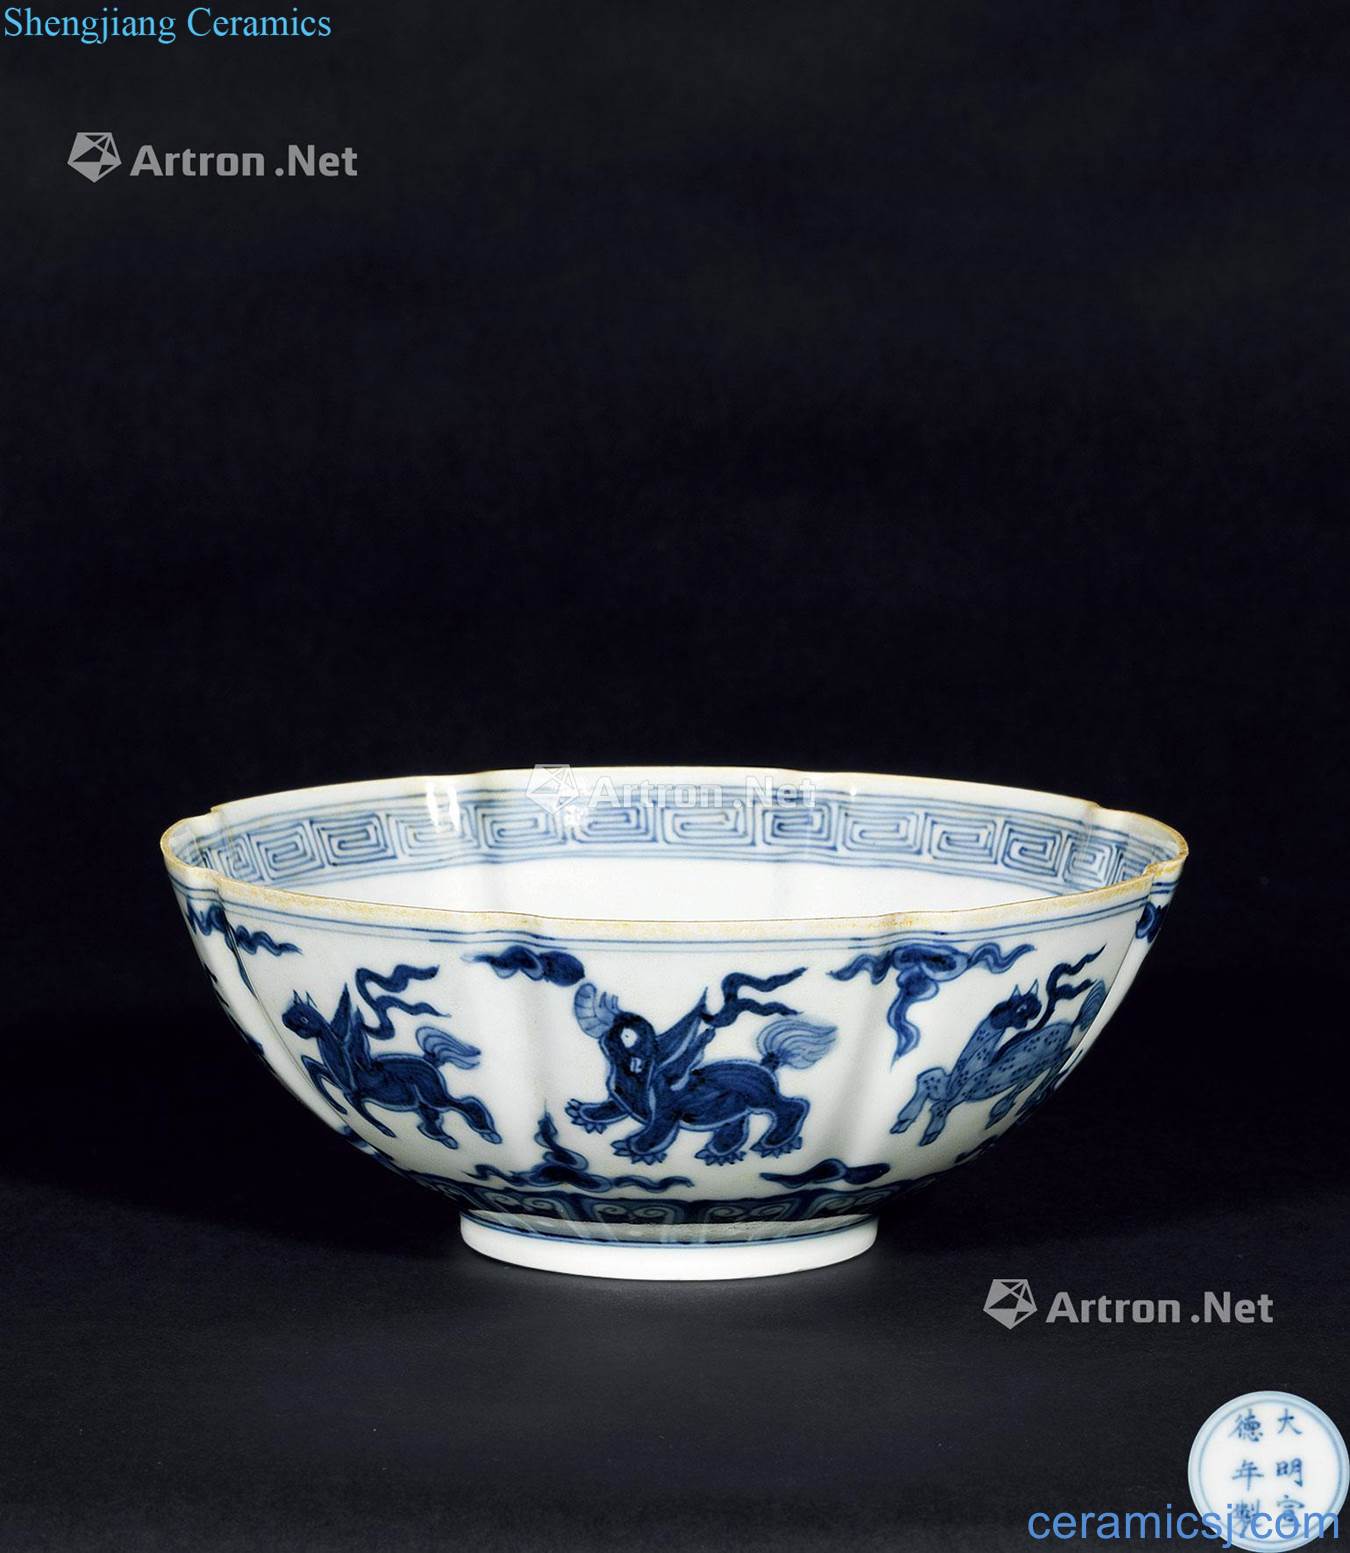 Ming Blue and white porcelain bowls